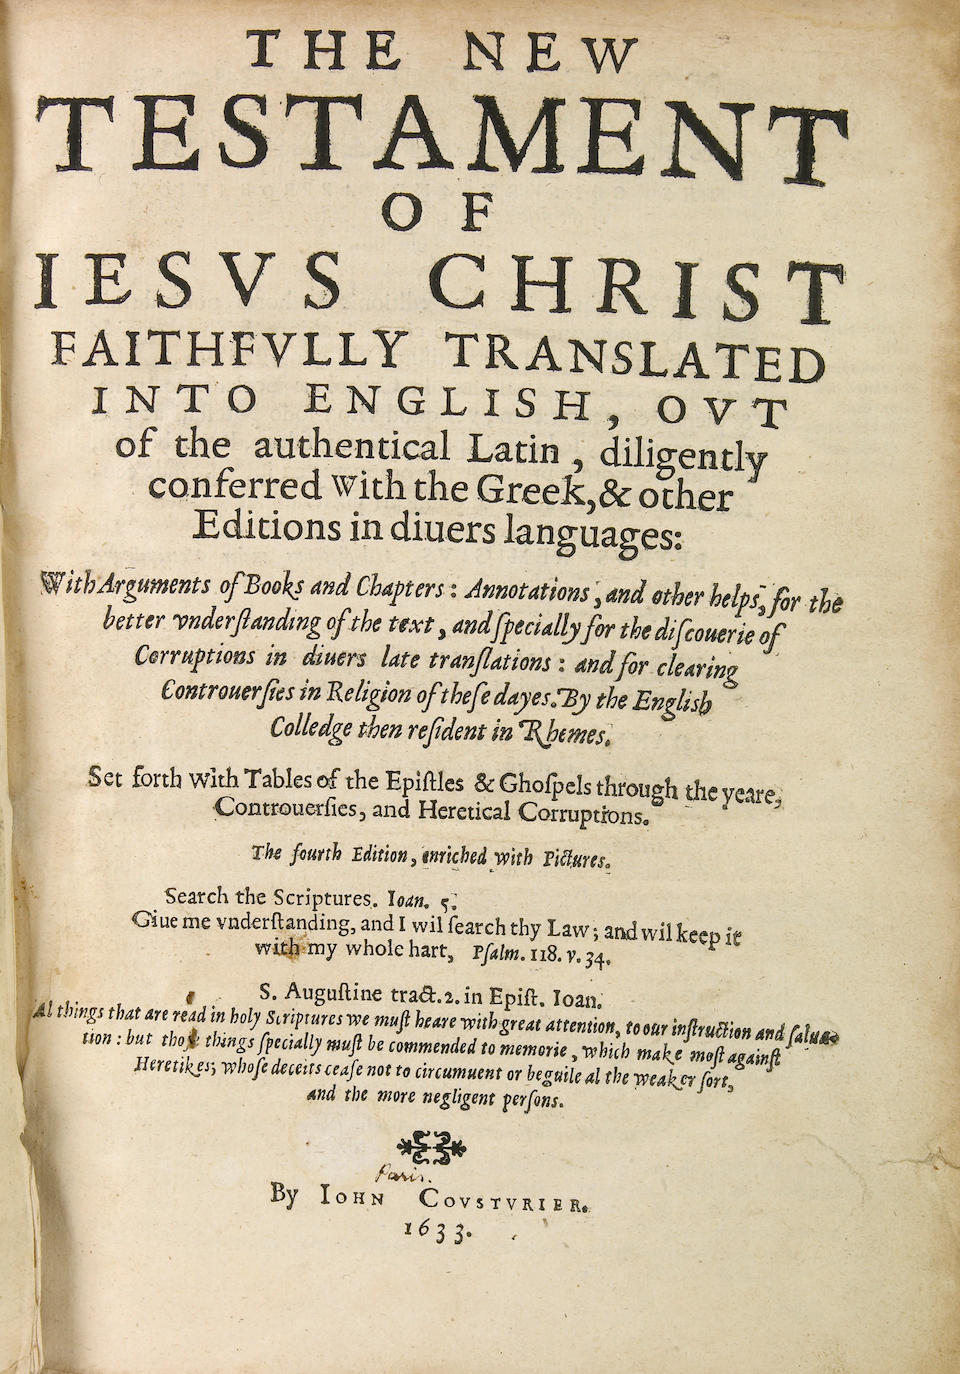 [BIBLE.] The New Testament ...Translated ... by the English Colledge ... in Rhemes. [Rouen?]: John Cousturier, 1633.